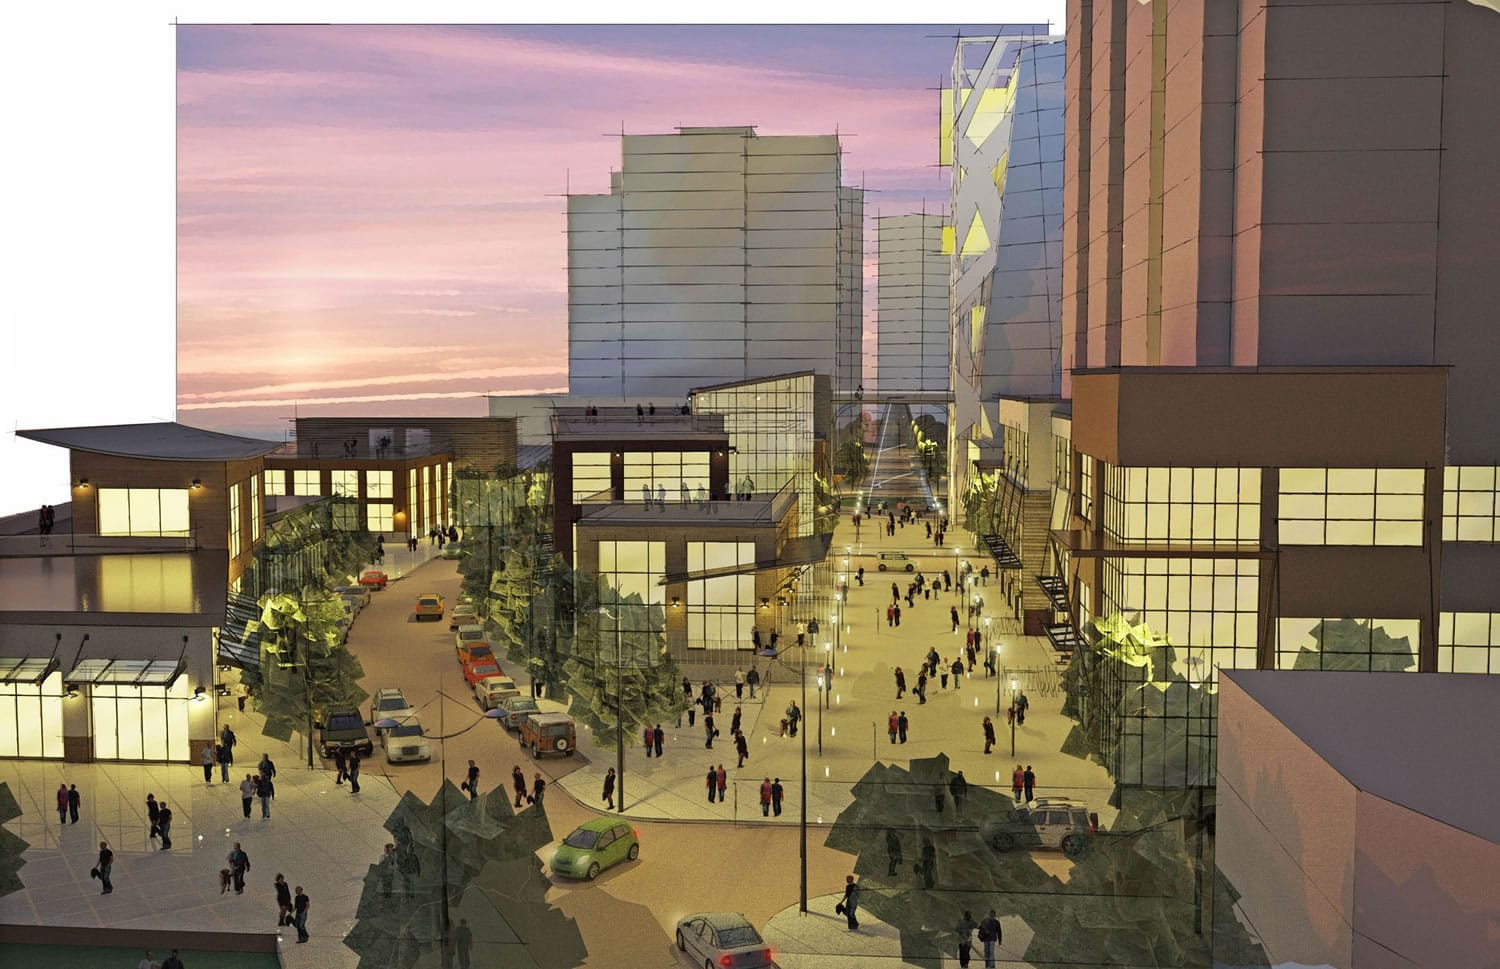 Architects at Twist Architectural have produced new renderings of how the Boise Cascade site might be redeveloped.